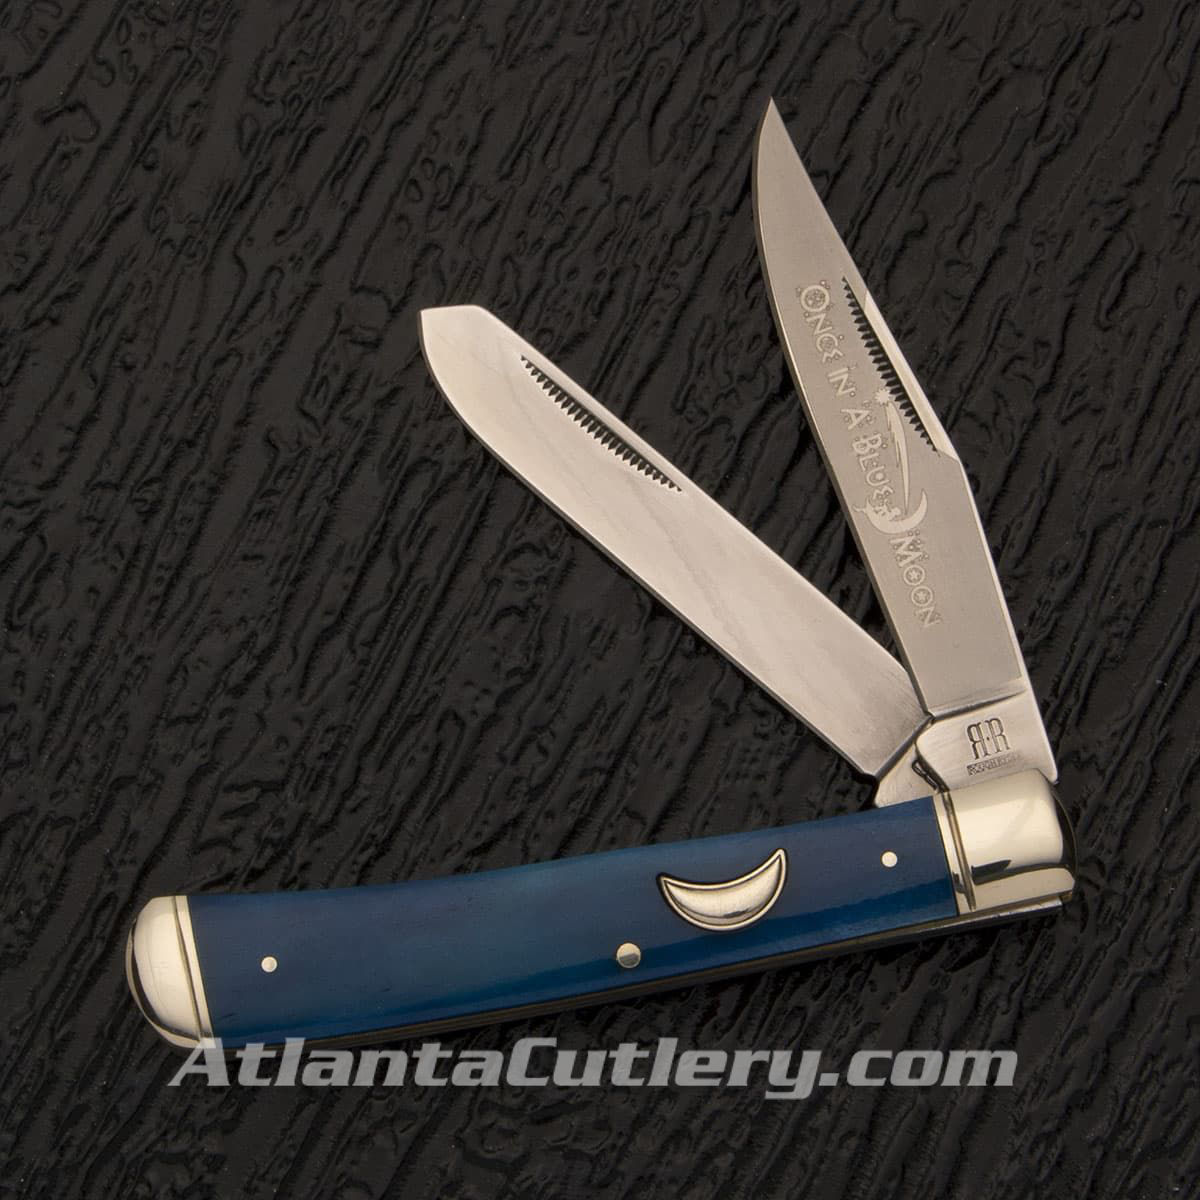 Rough Ryder Once in a Blue Moon Trapper pocket knife with bone handle dyed deep blue with a crescent moon shield